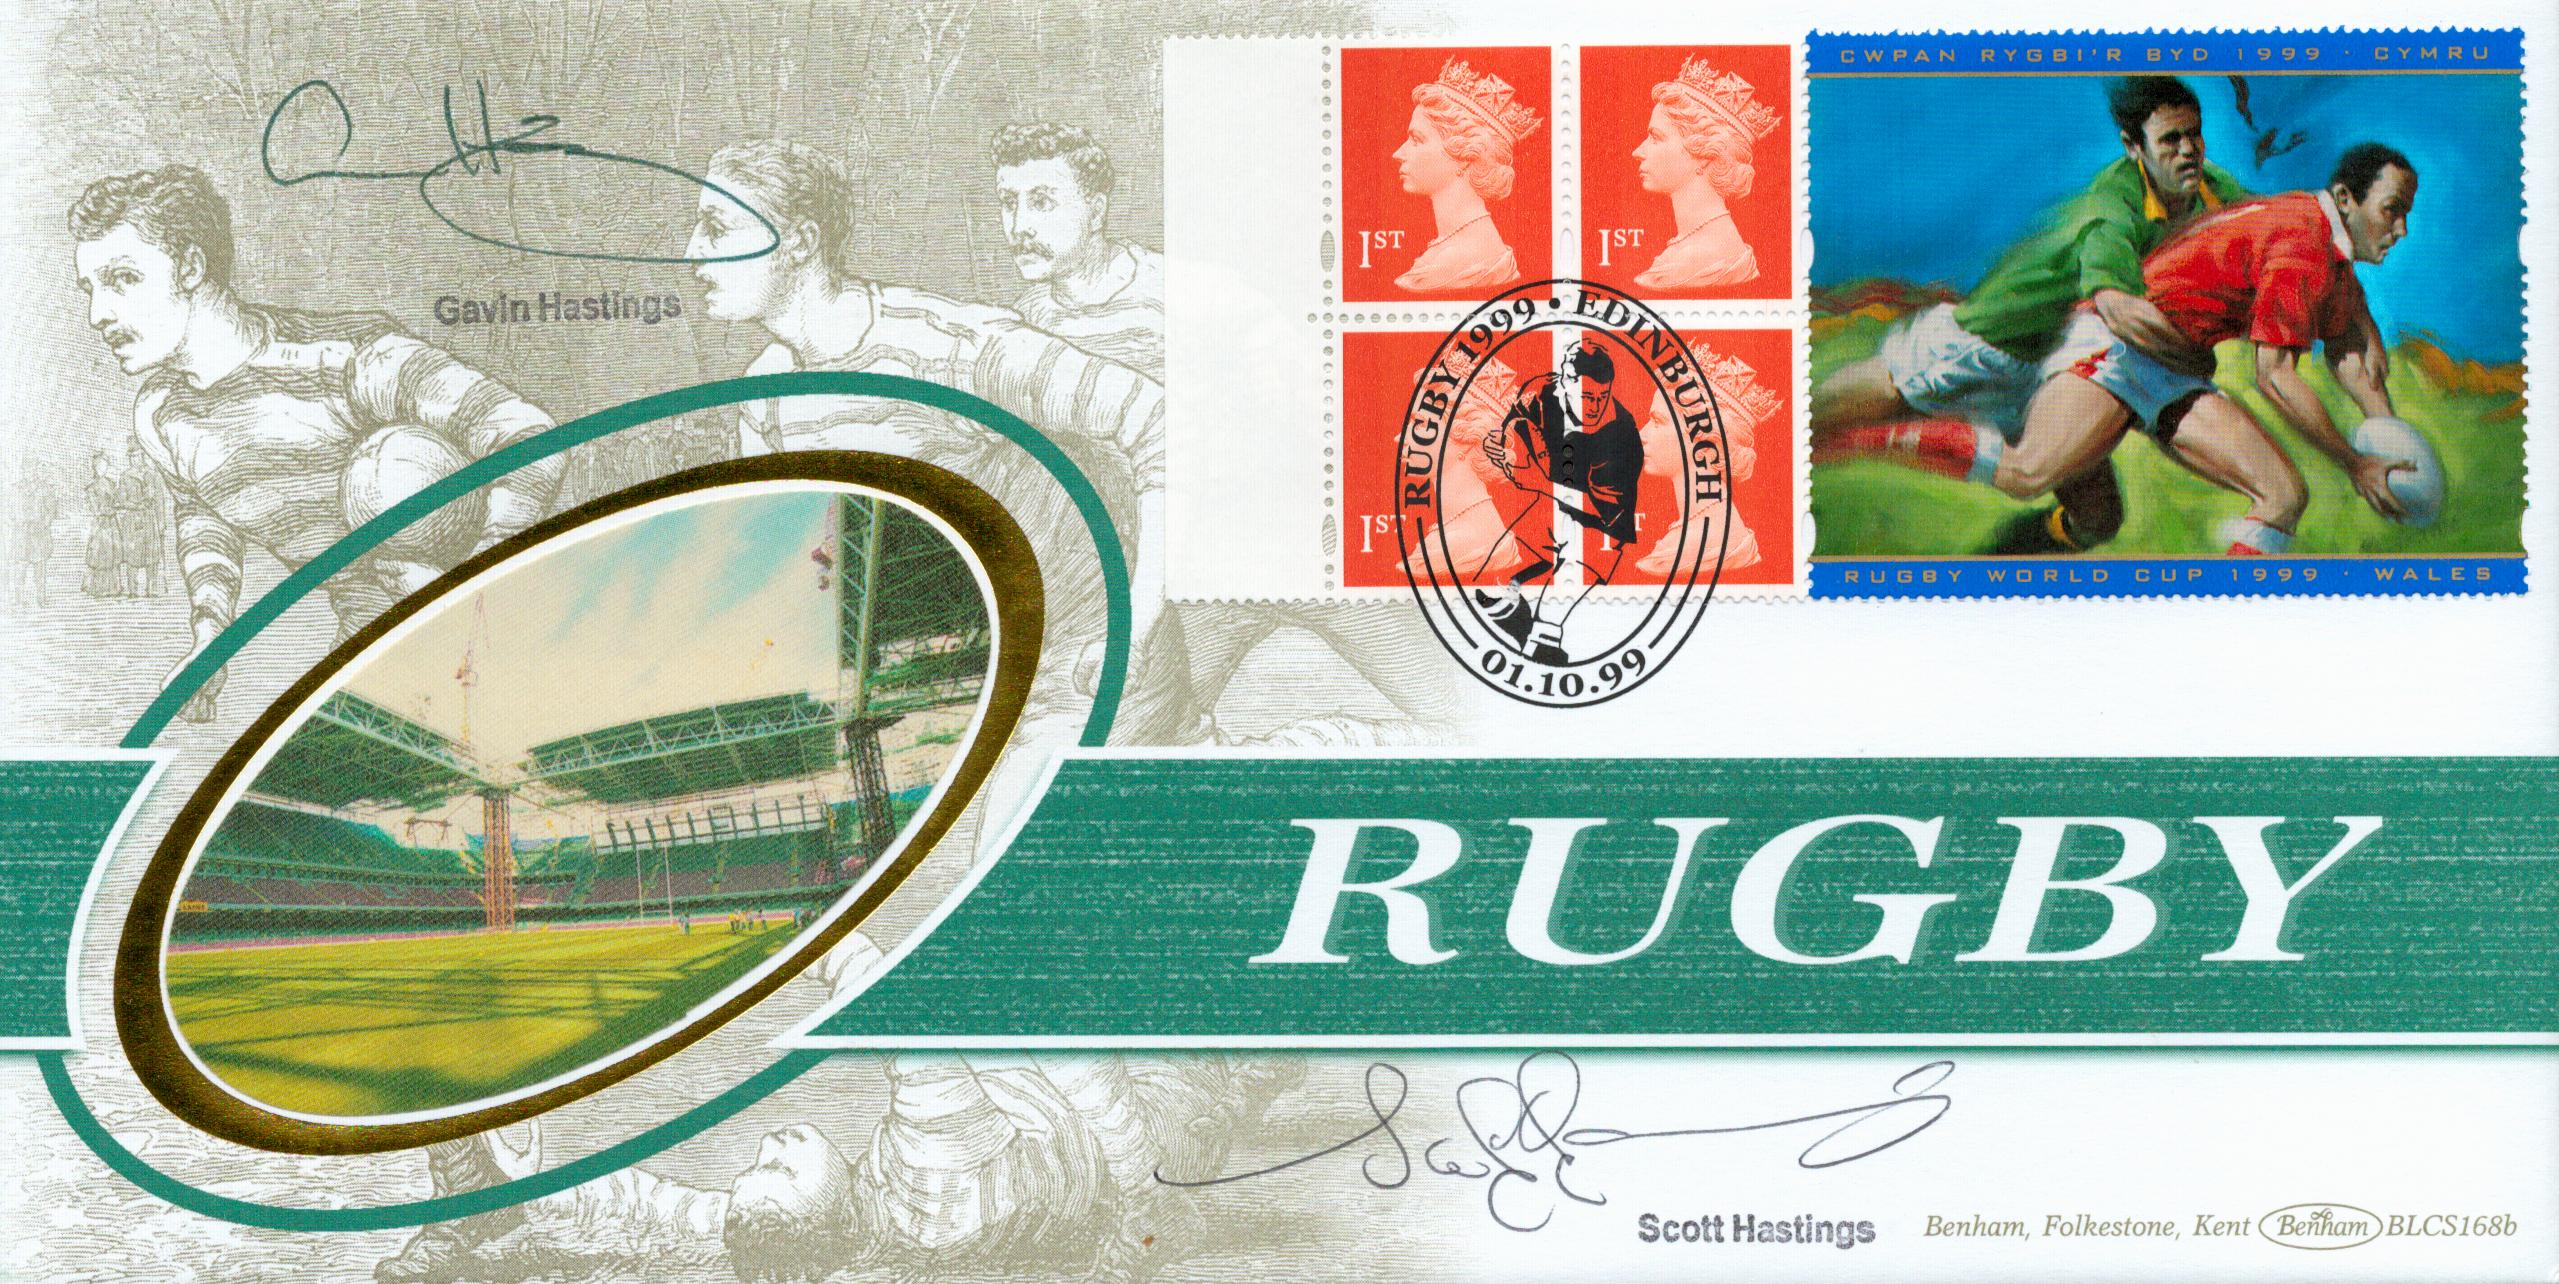 Rugby Gavin Hastings and Scott Hastings signed Benham Rugby Cover PM Rugby 1999 Edinburgh 01. 10.